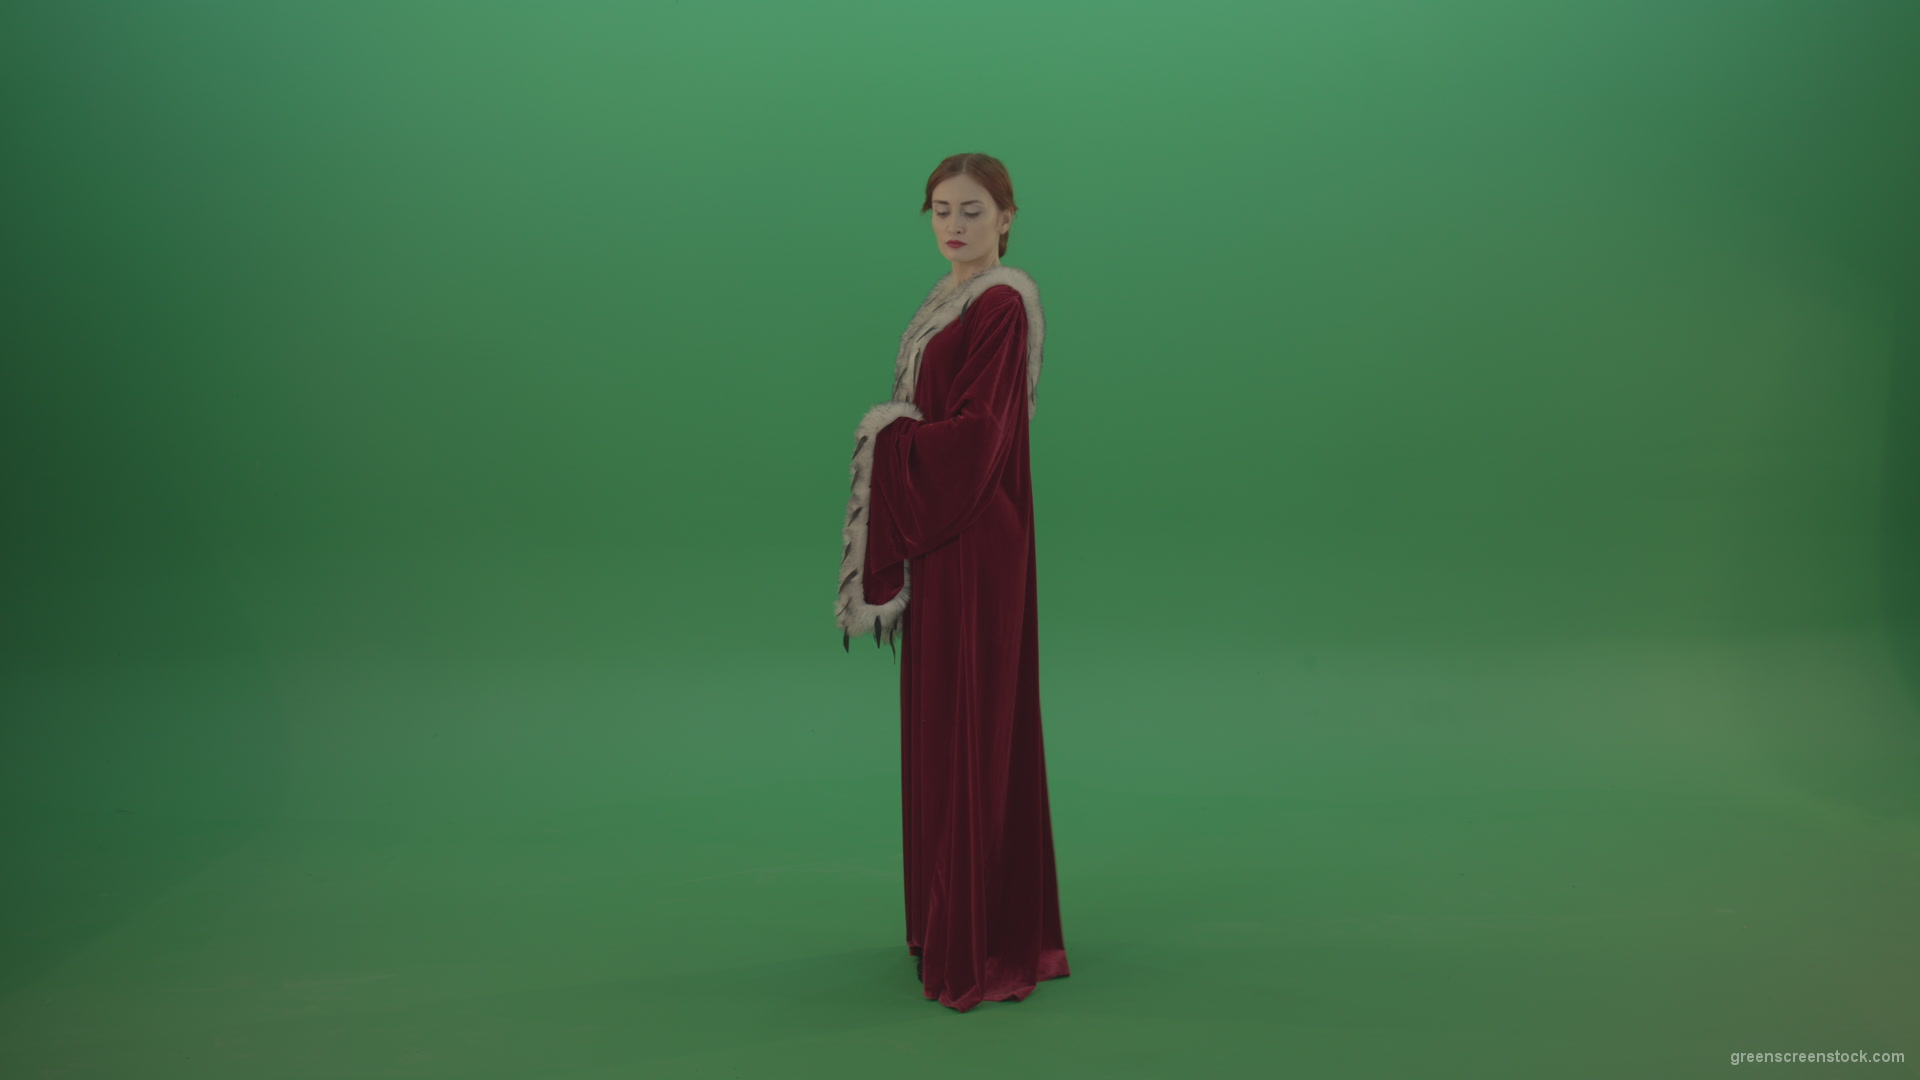 Elegant-woman-princess-with-light-movements-shows-her-beauty-dressed-in-red-cloak-on-a-green-background_008 Green Screen Stock